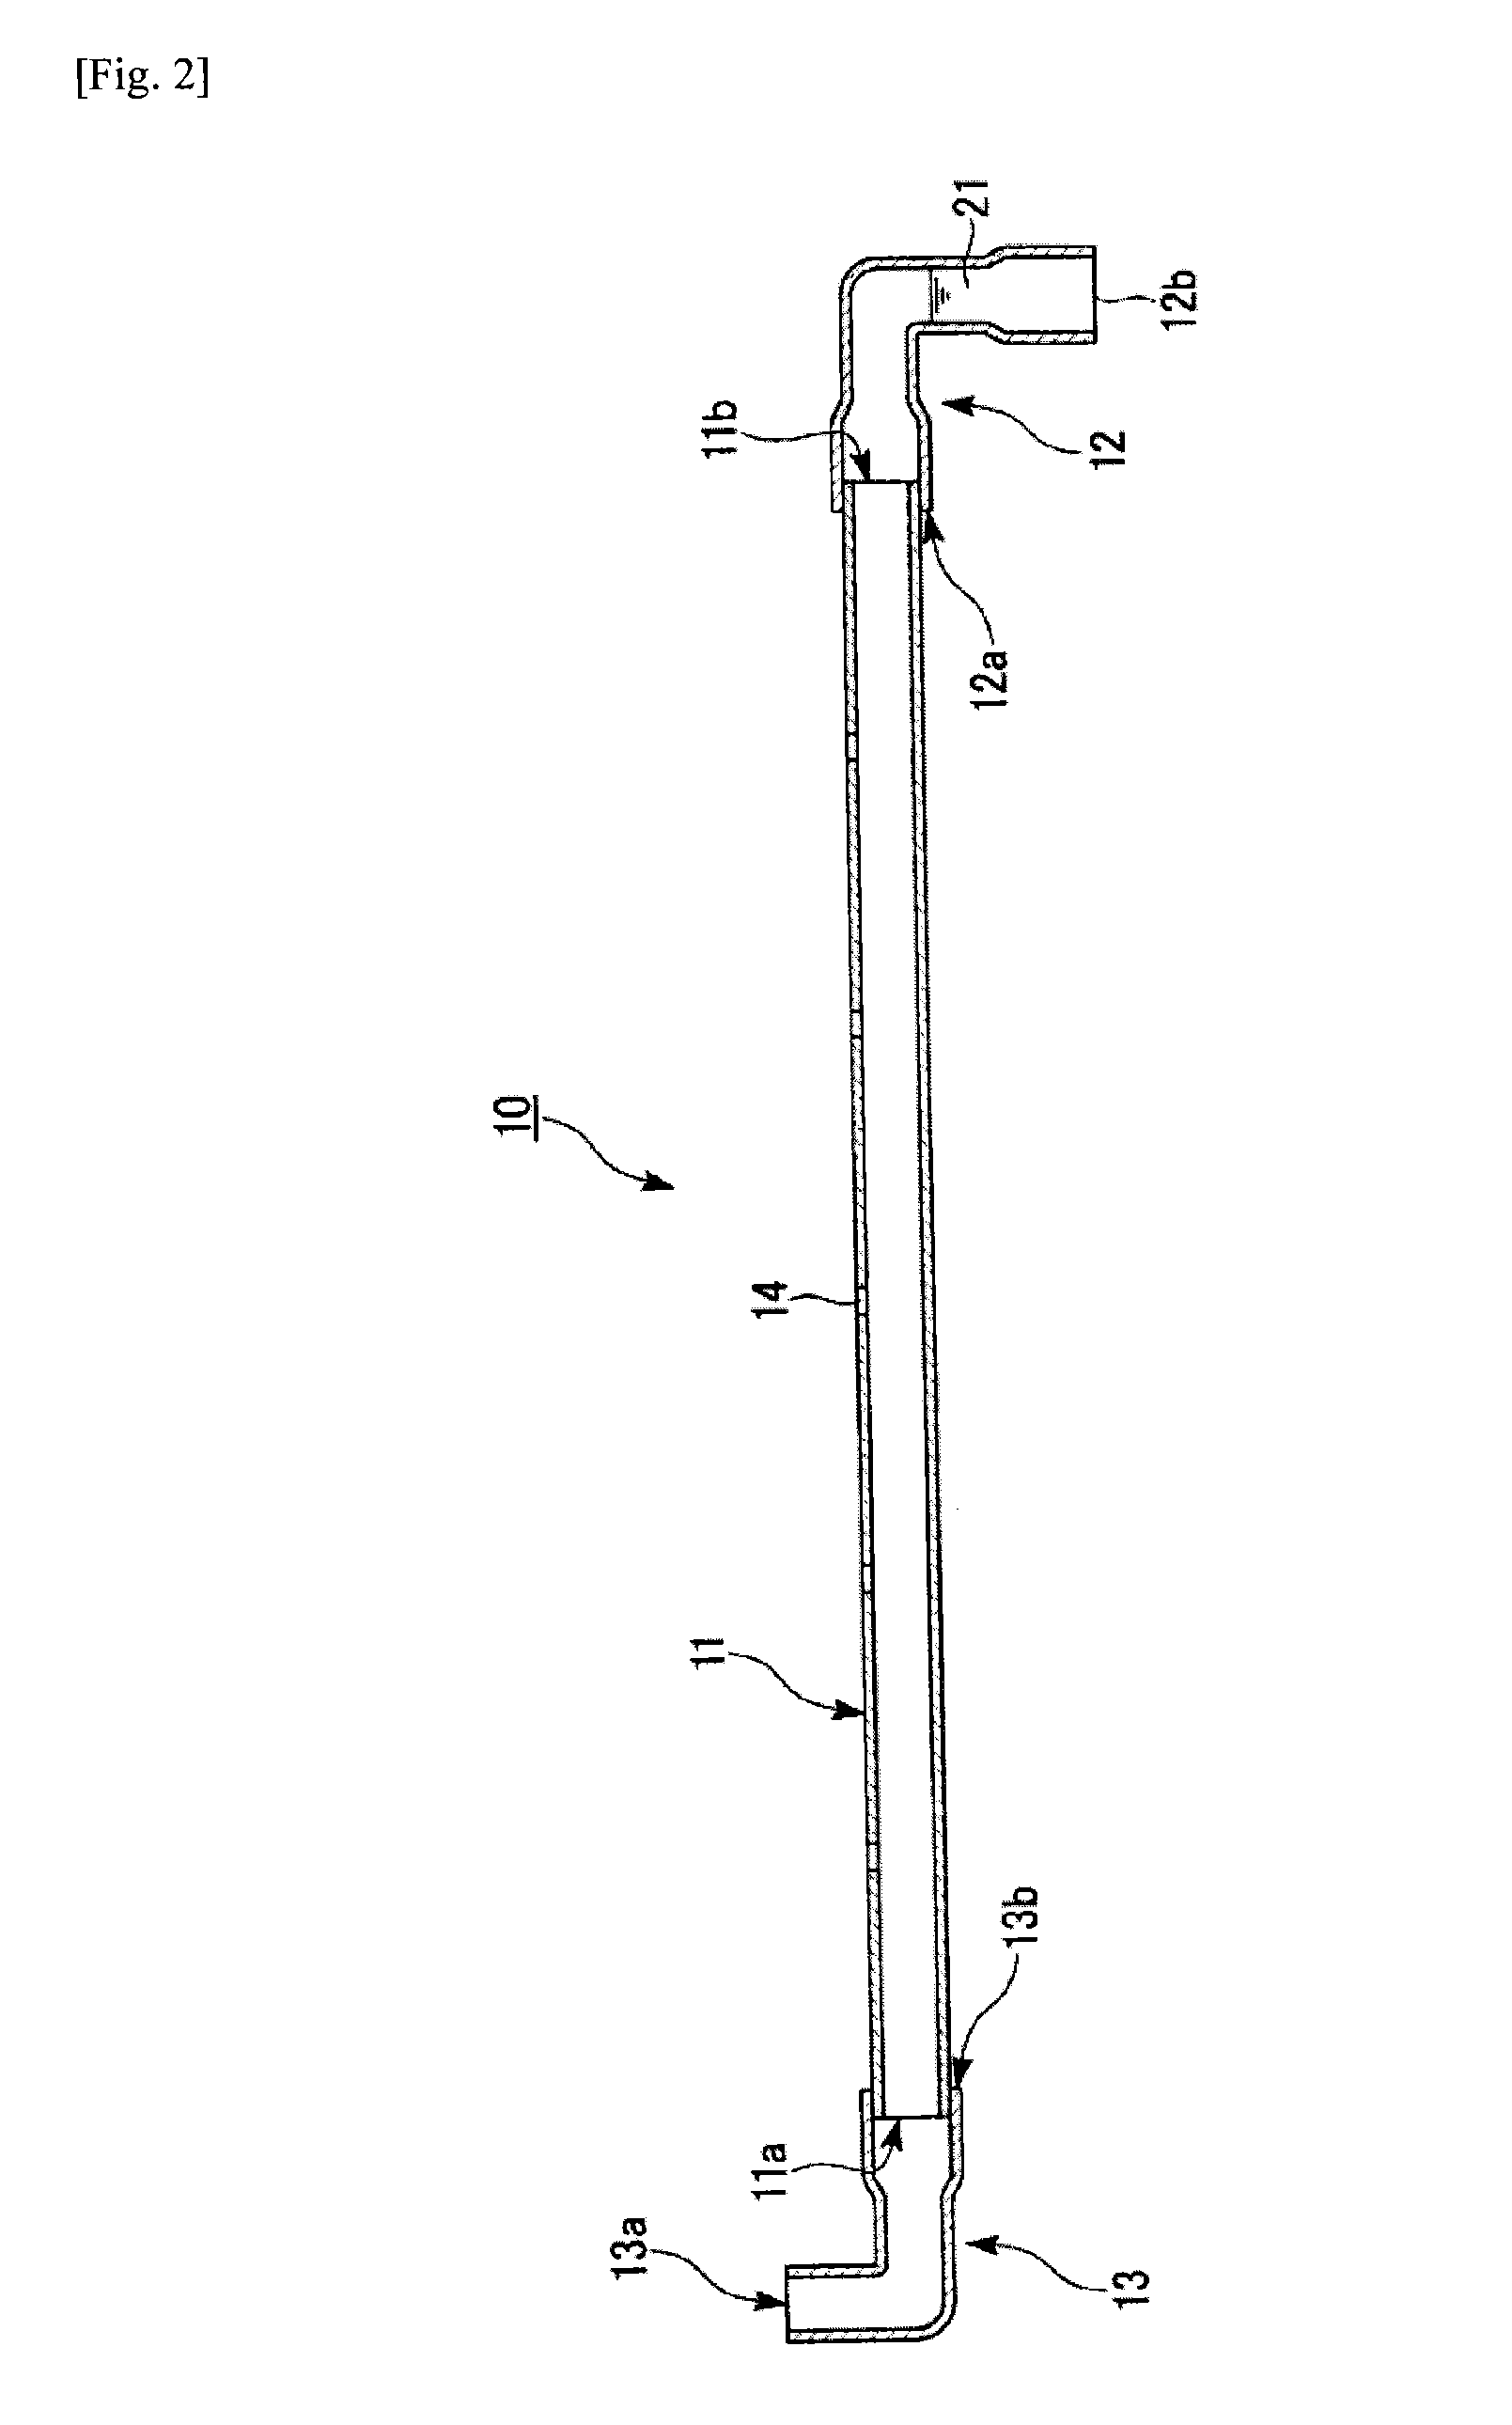 Aeration device, operation method therefor, and water treatment apparatus